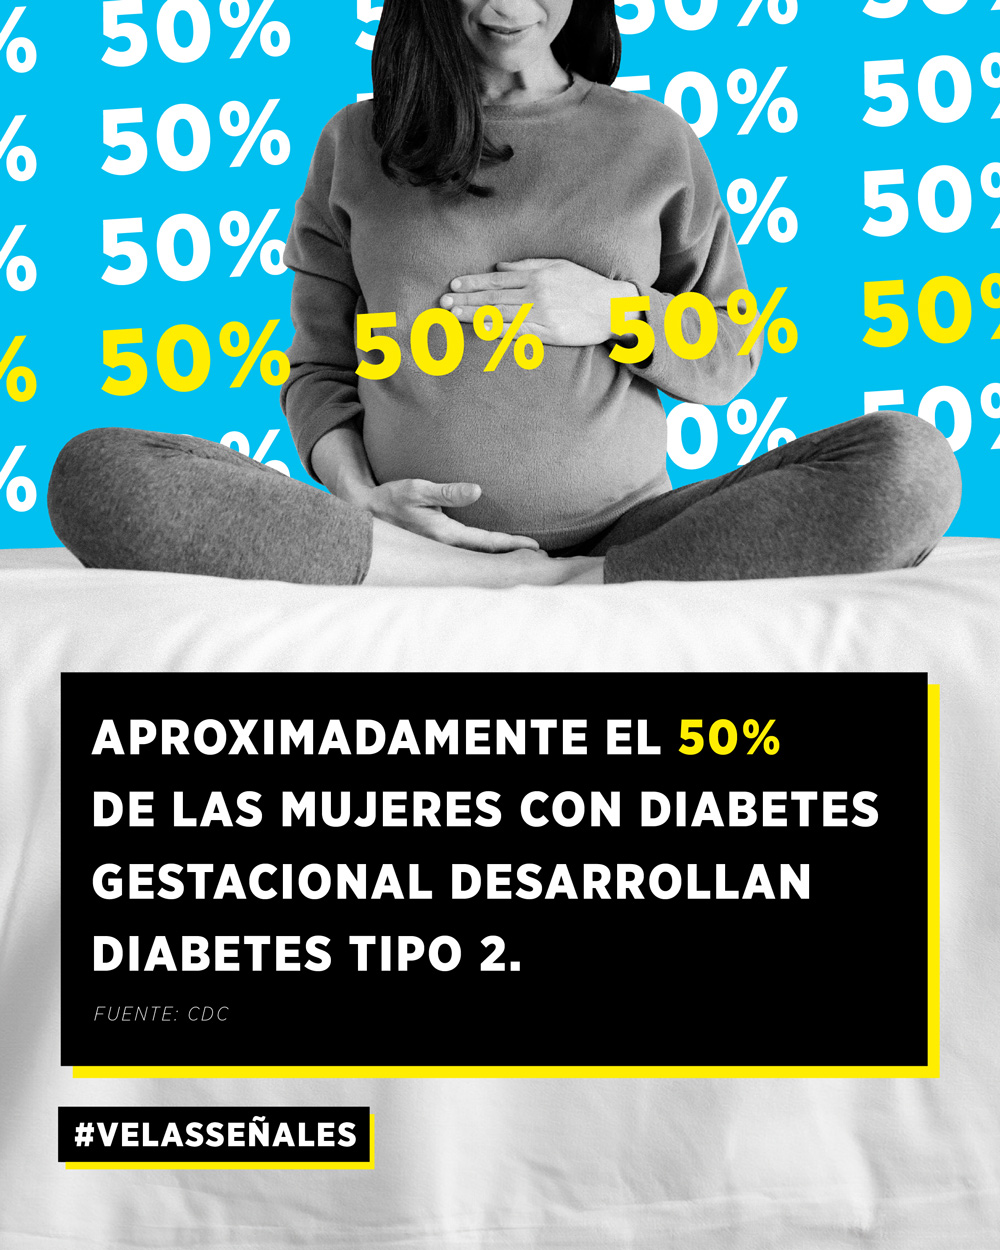 About 50% of women with gestational diabetes go on to develop type 2 diabetes